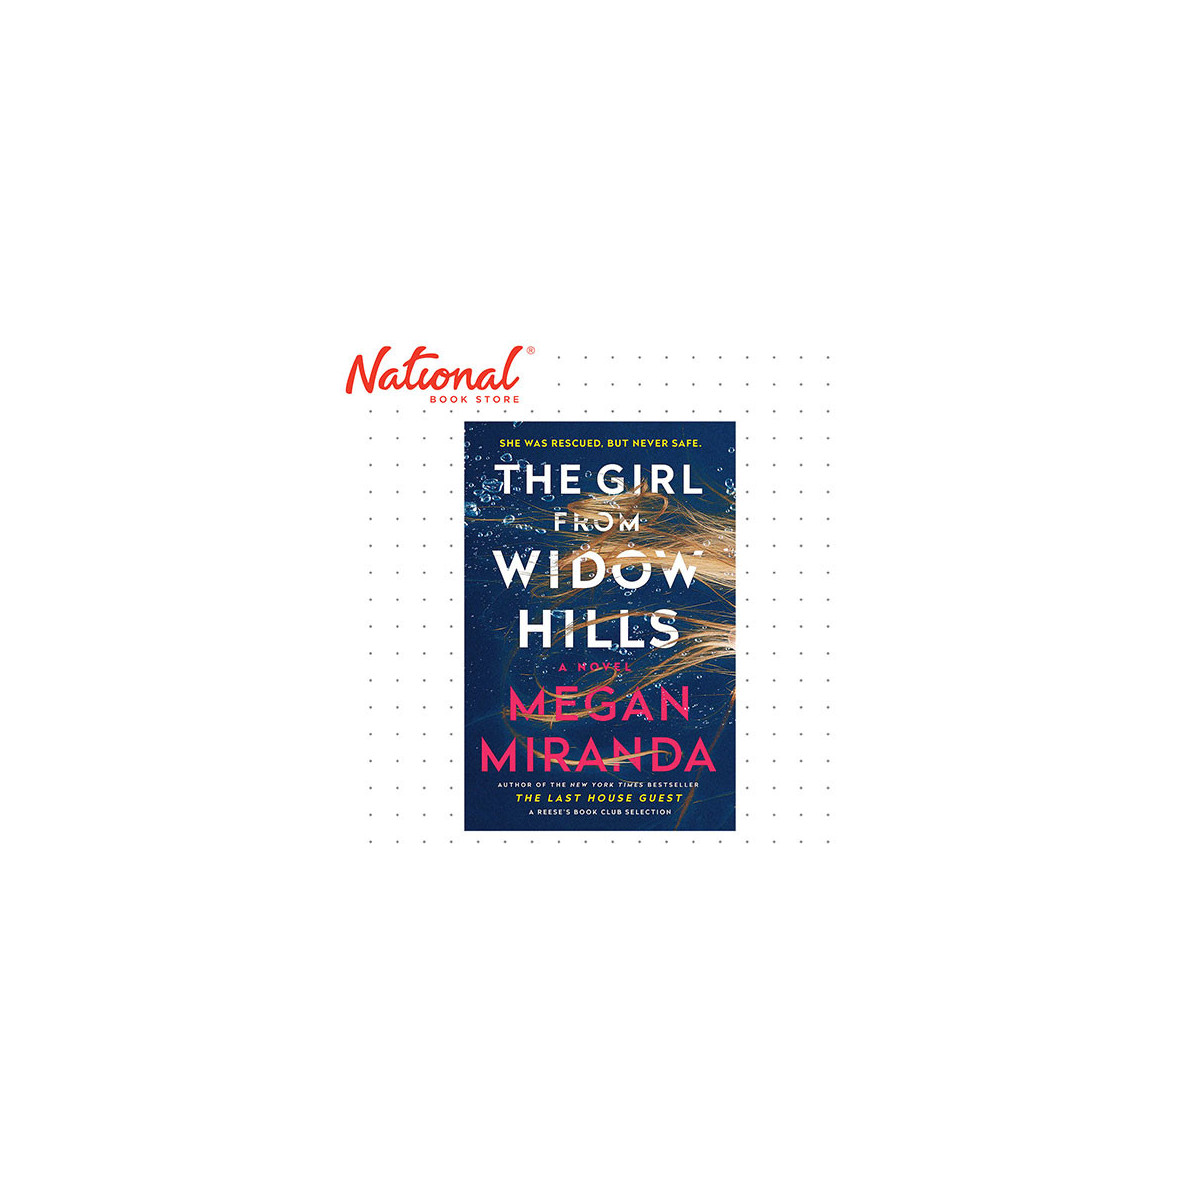 FROM　A　HILLS:　CONTEMPORARY　BY　MEGAN　MIRANDA　HARDCOVER　NOVEL　THE　WIDOW　GIRL　FICTION